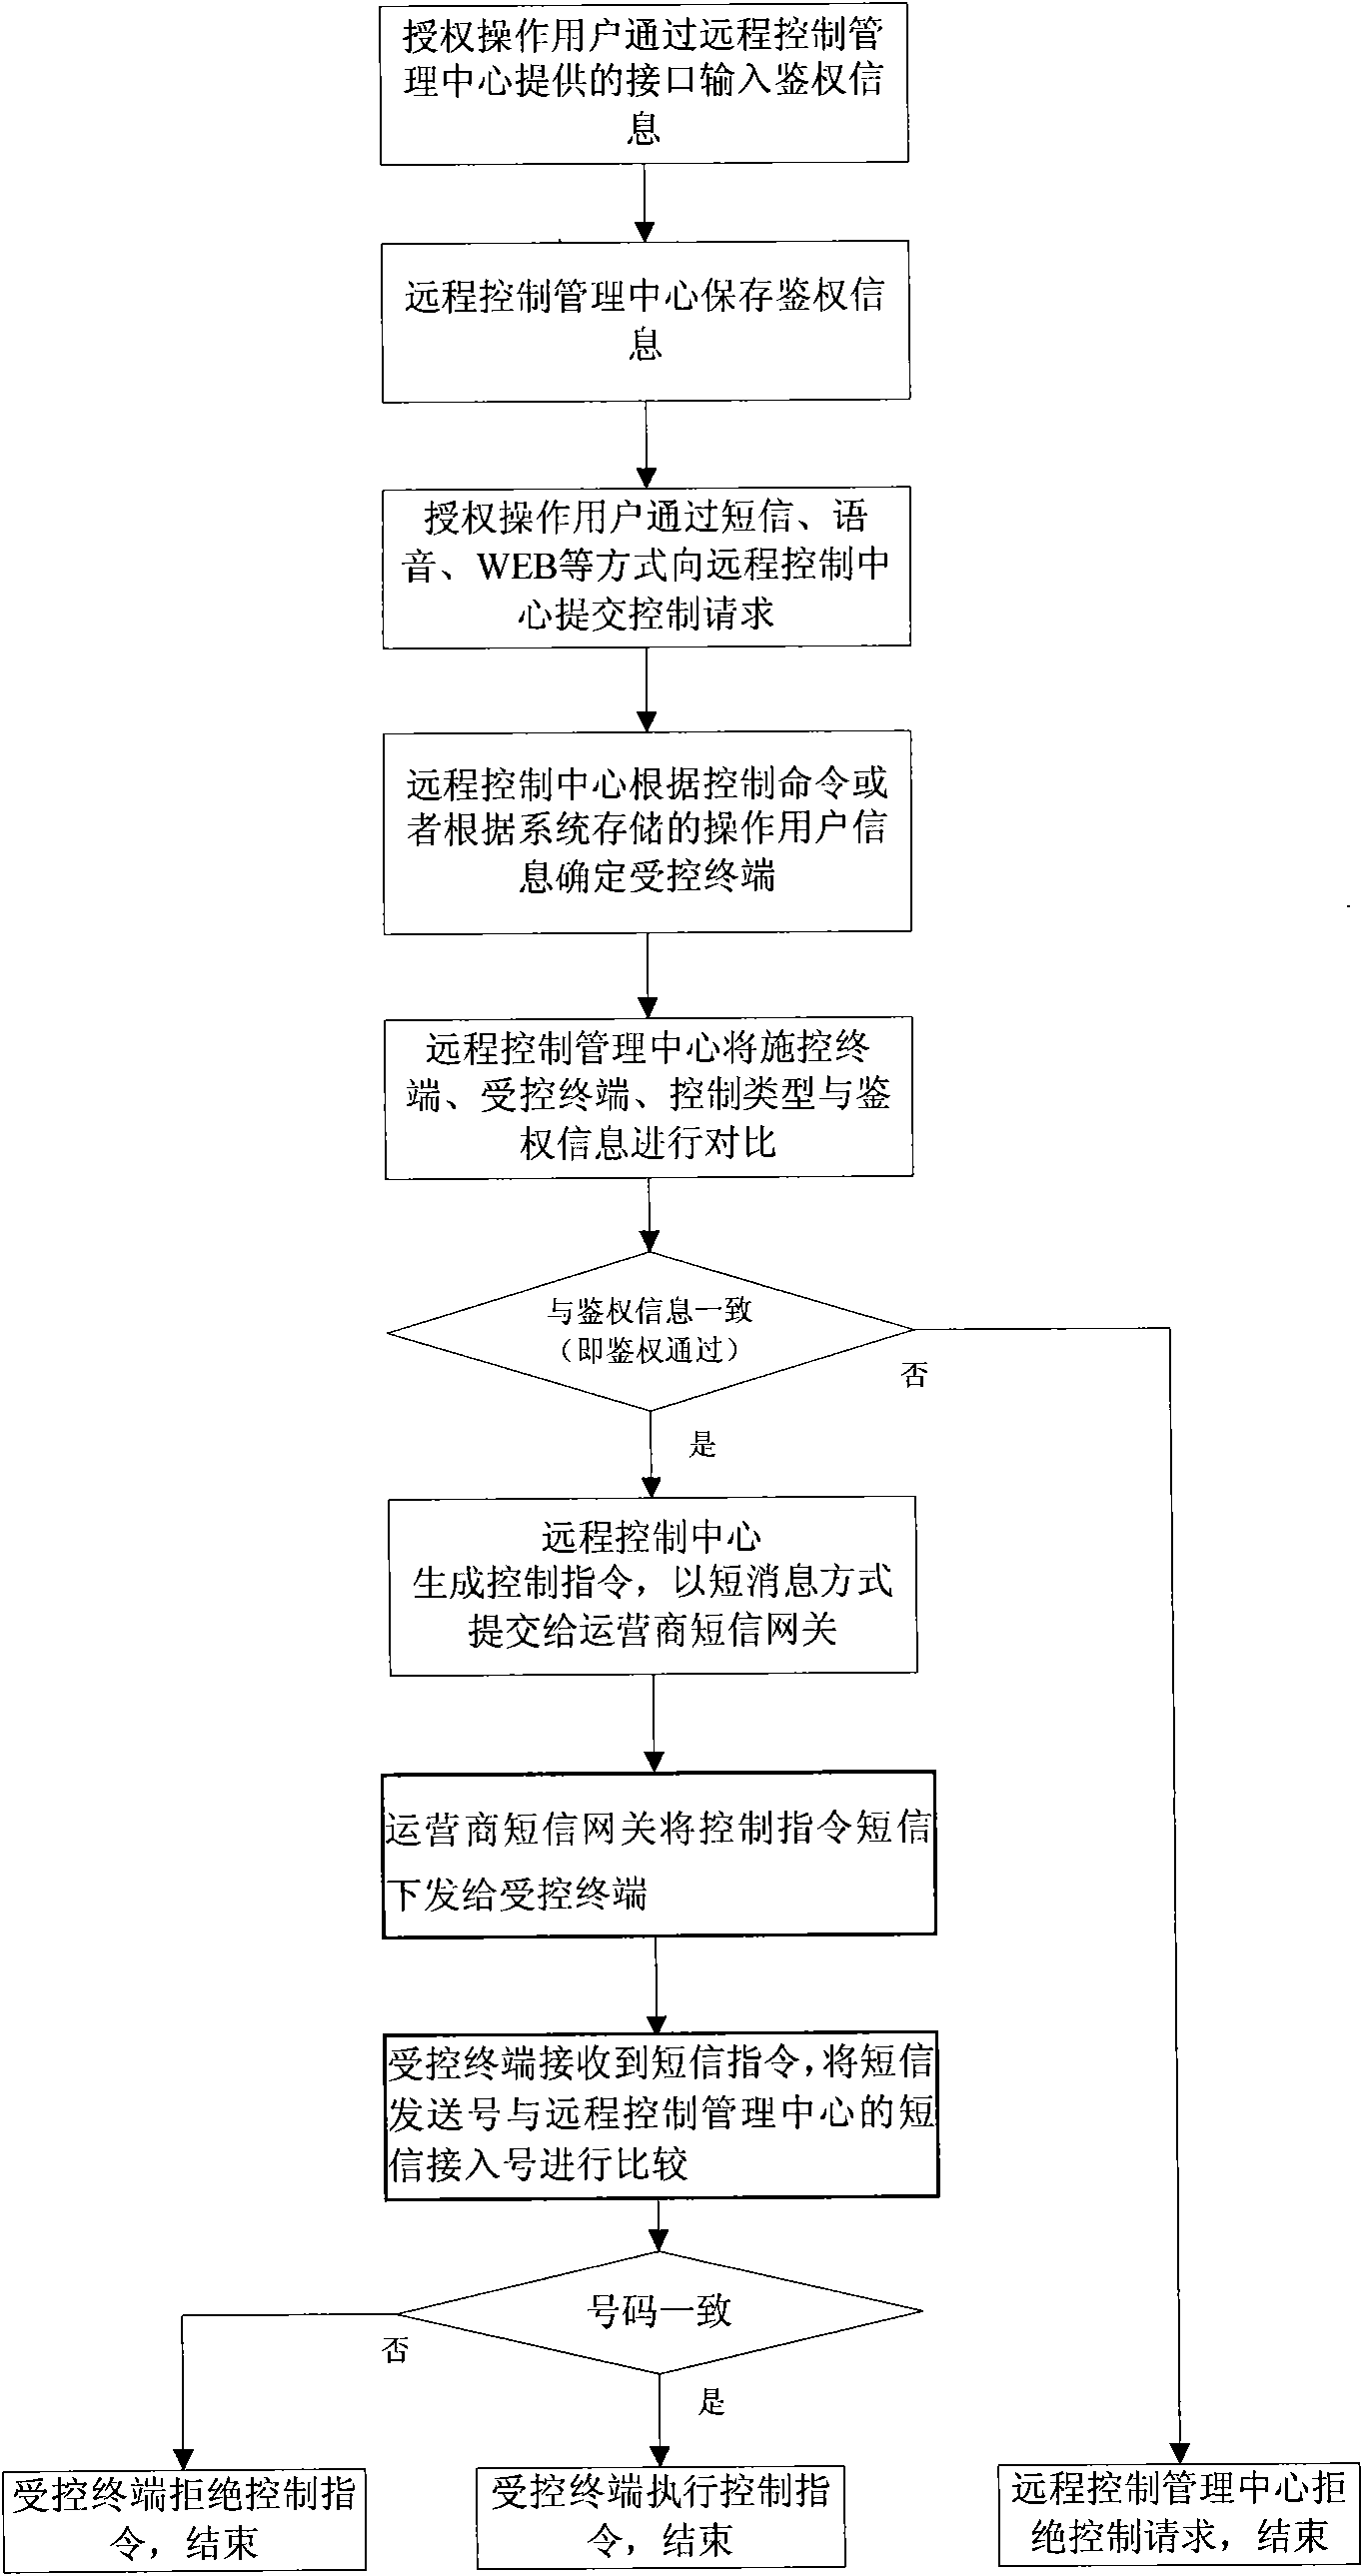 Remote control system and method based on short messages